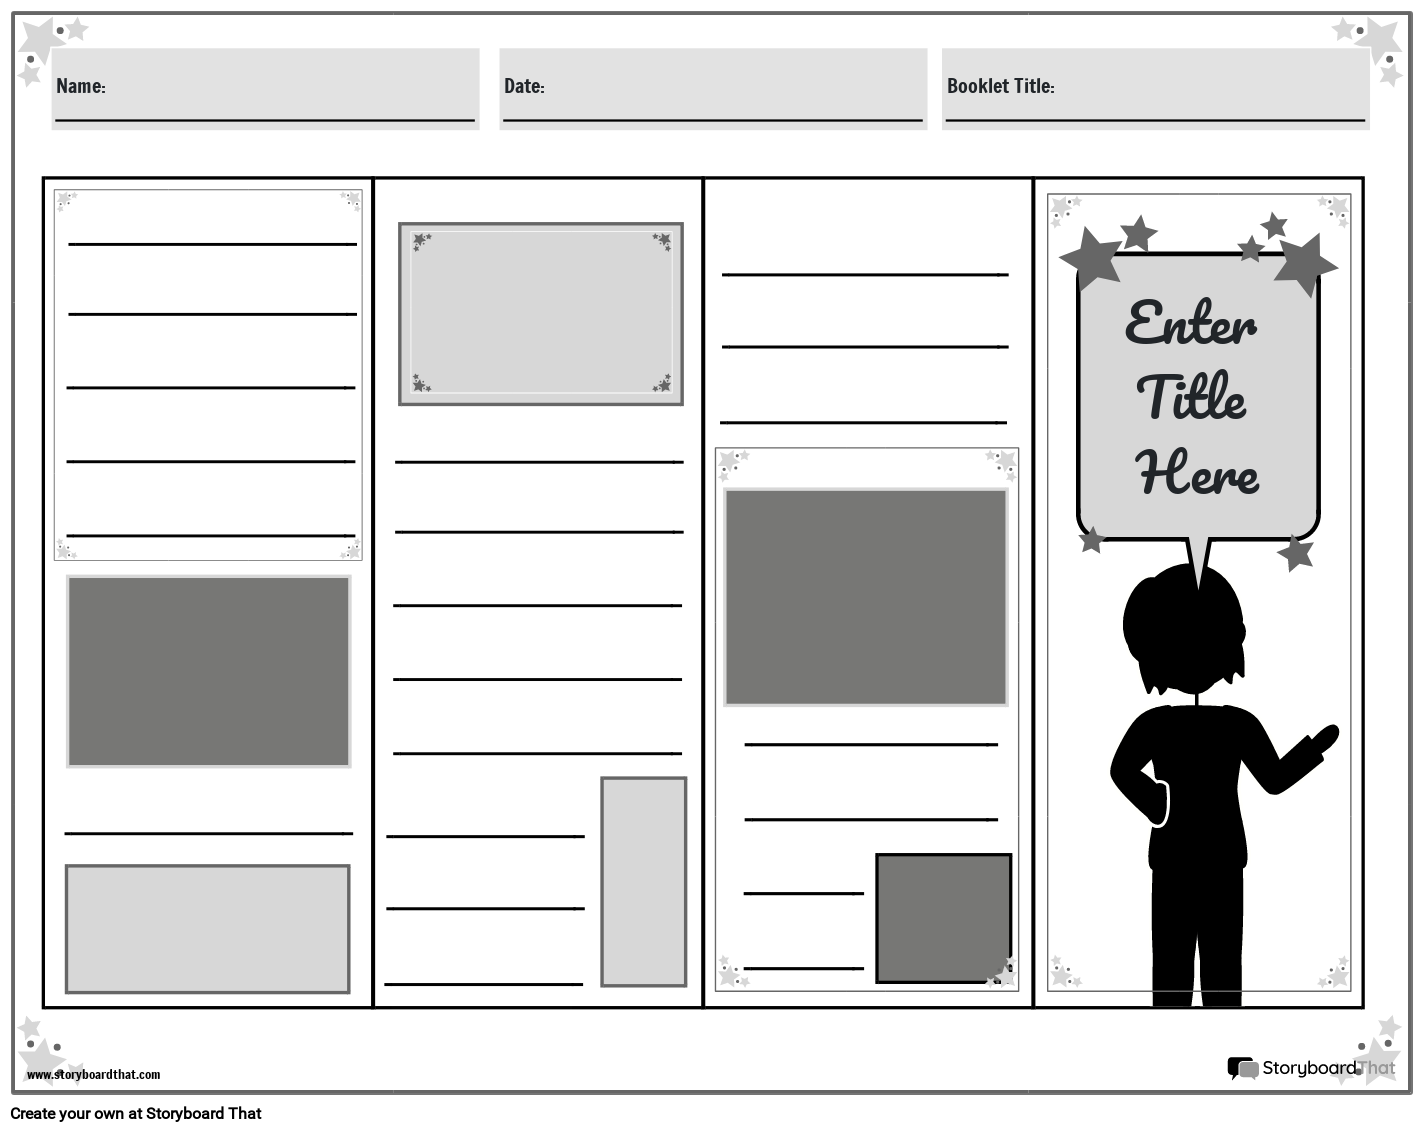 Character Silhouette Based Booklet Template Design